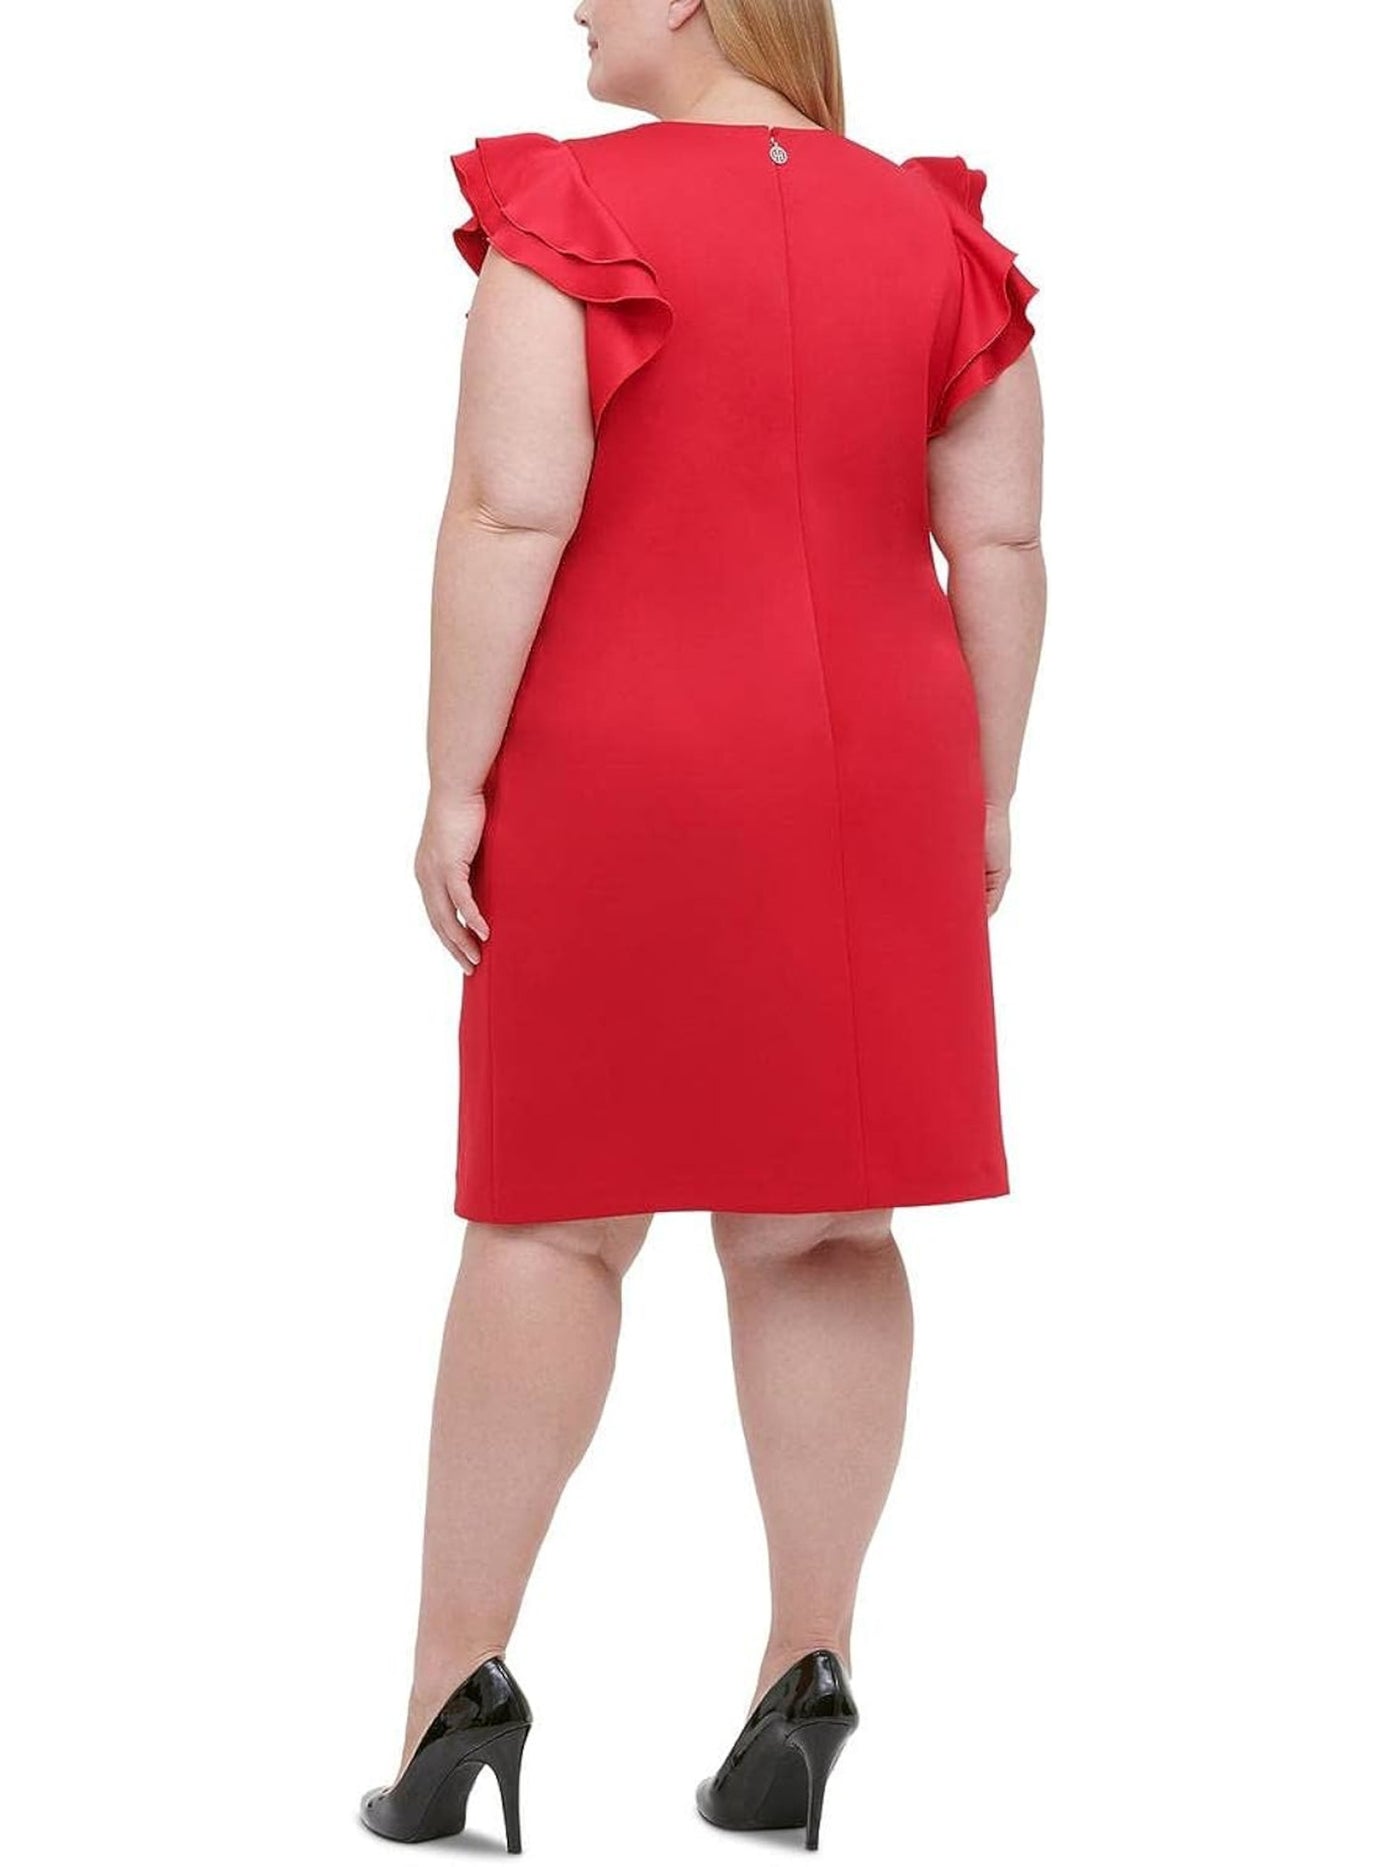 TOMMY HILFIGER Womens Red Ruffled Darted Zippered Cap Sleeve Jewel Neck Knee Length Cocktail Sheath Dress Plus 22W